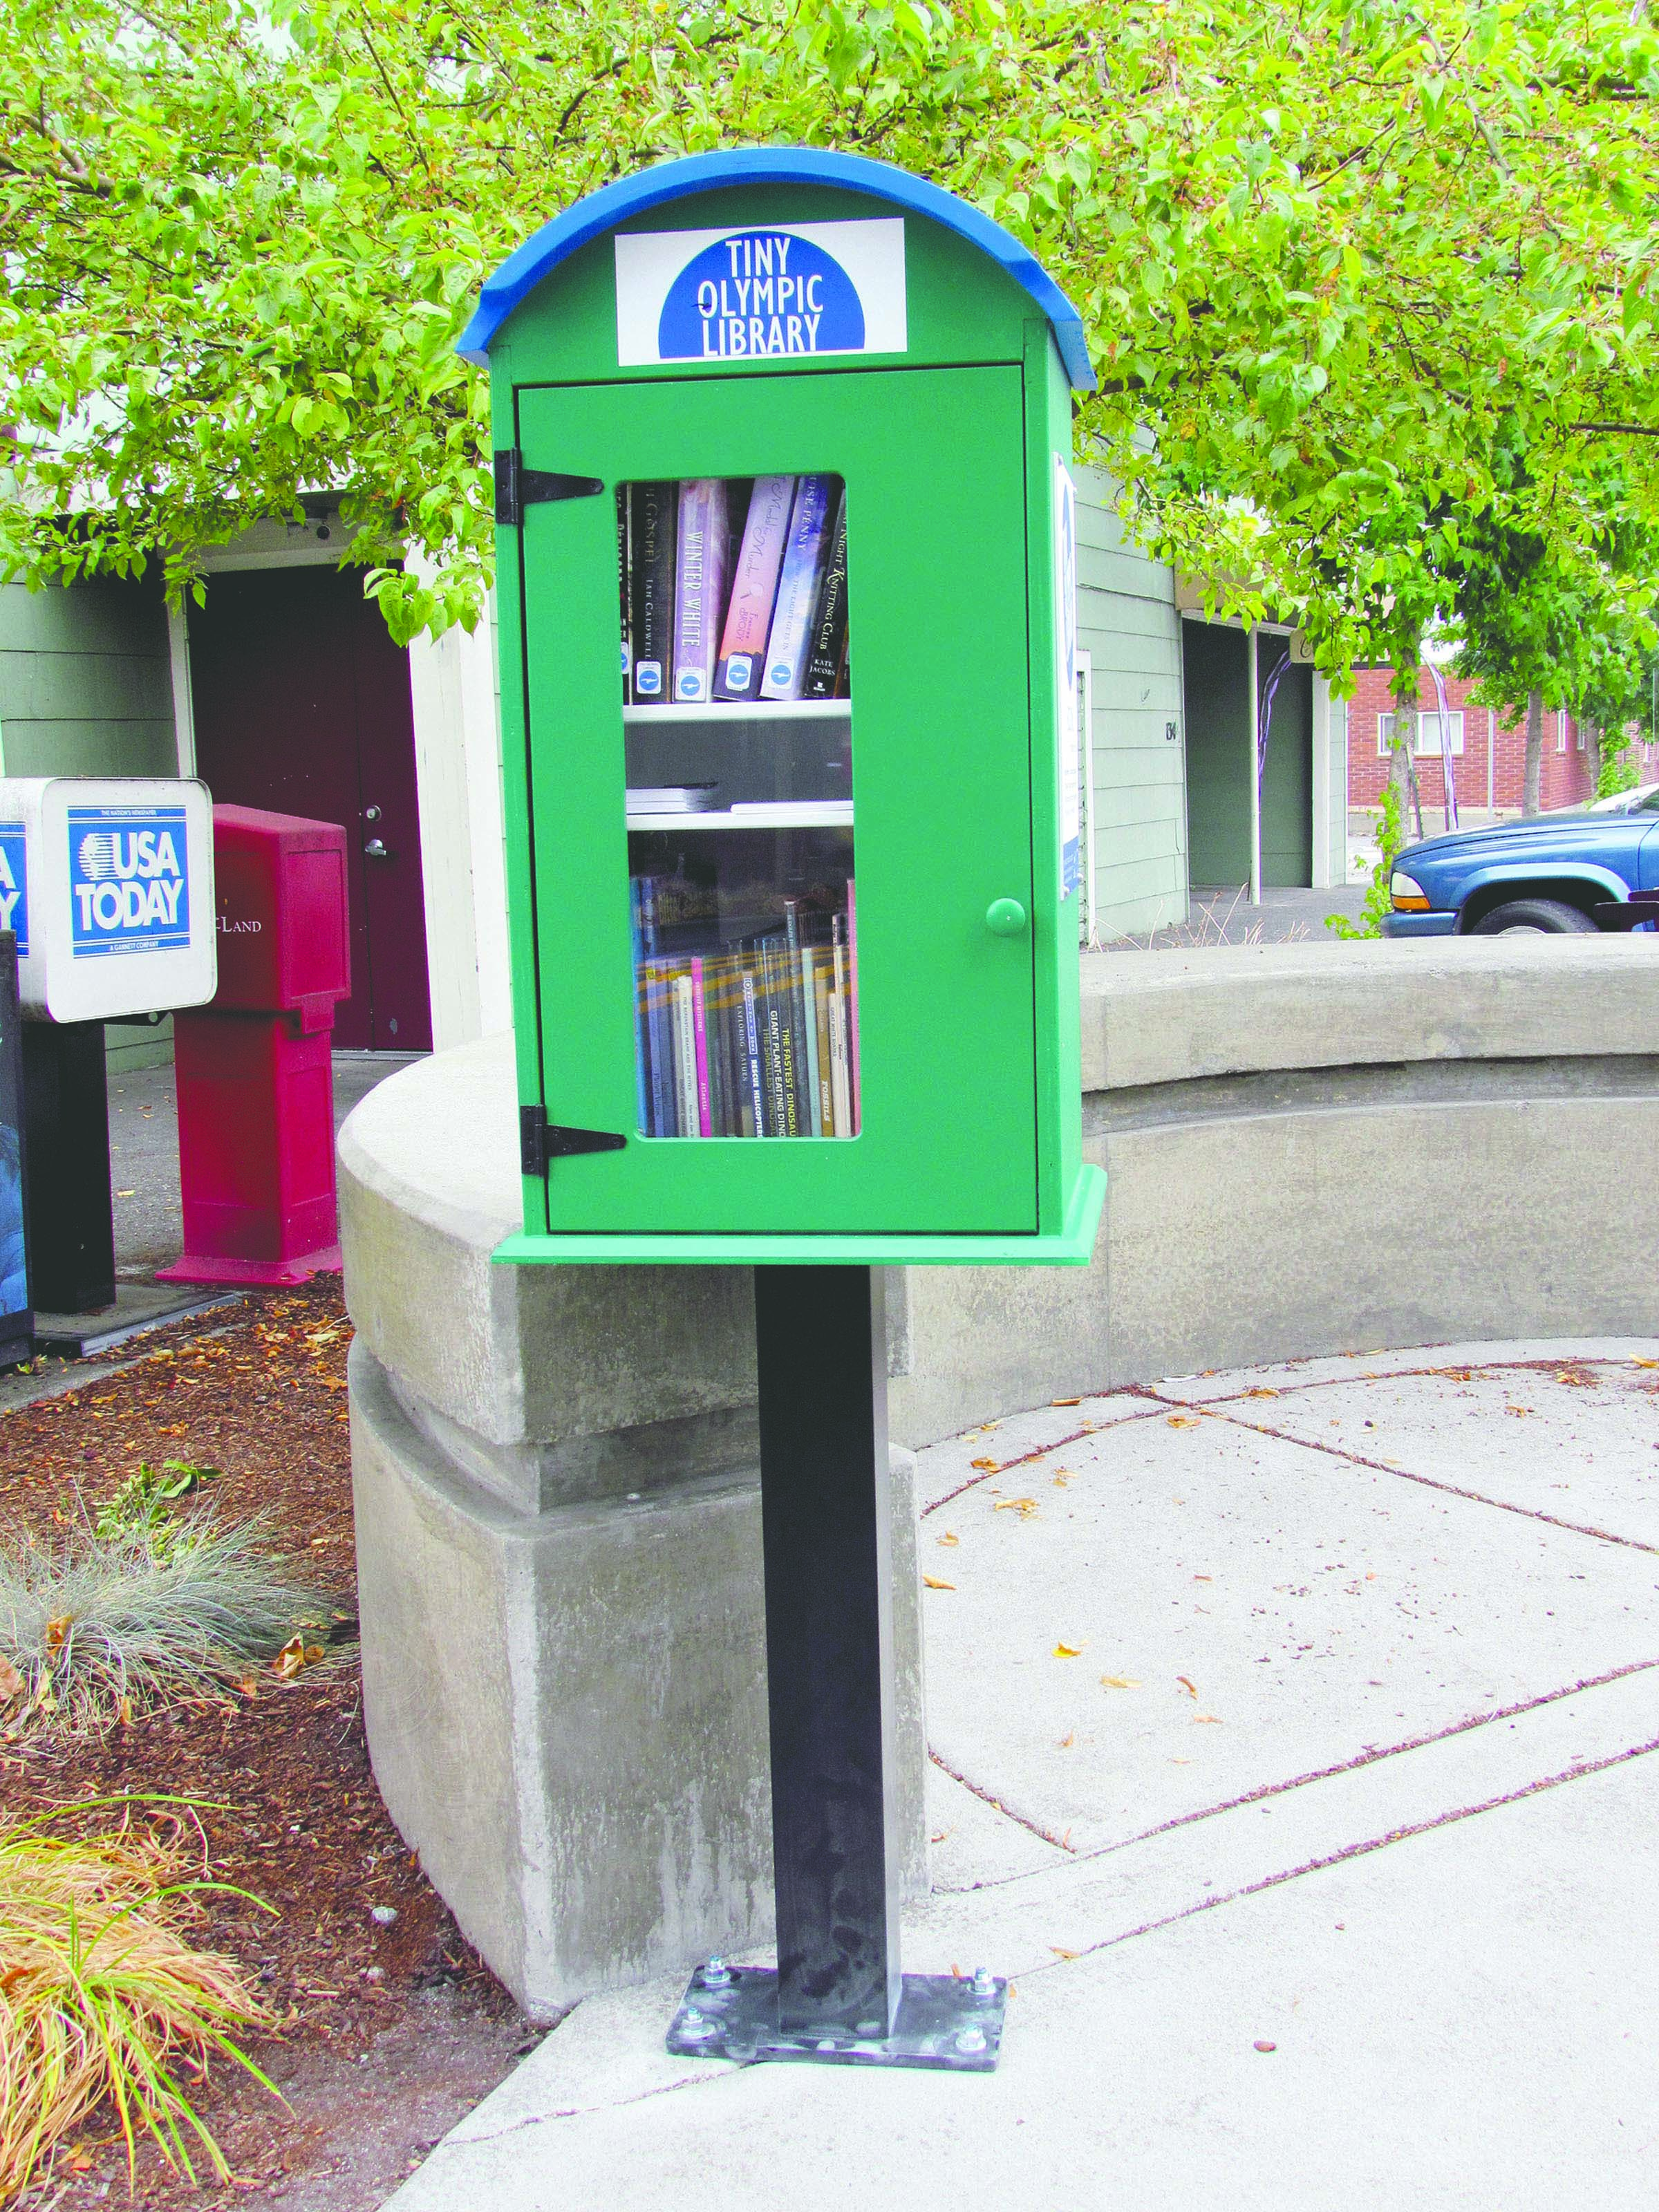 A Tiny Olympic Library is now ready for readers in four locations across the Peninsula.